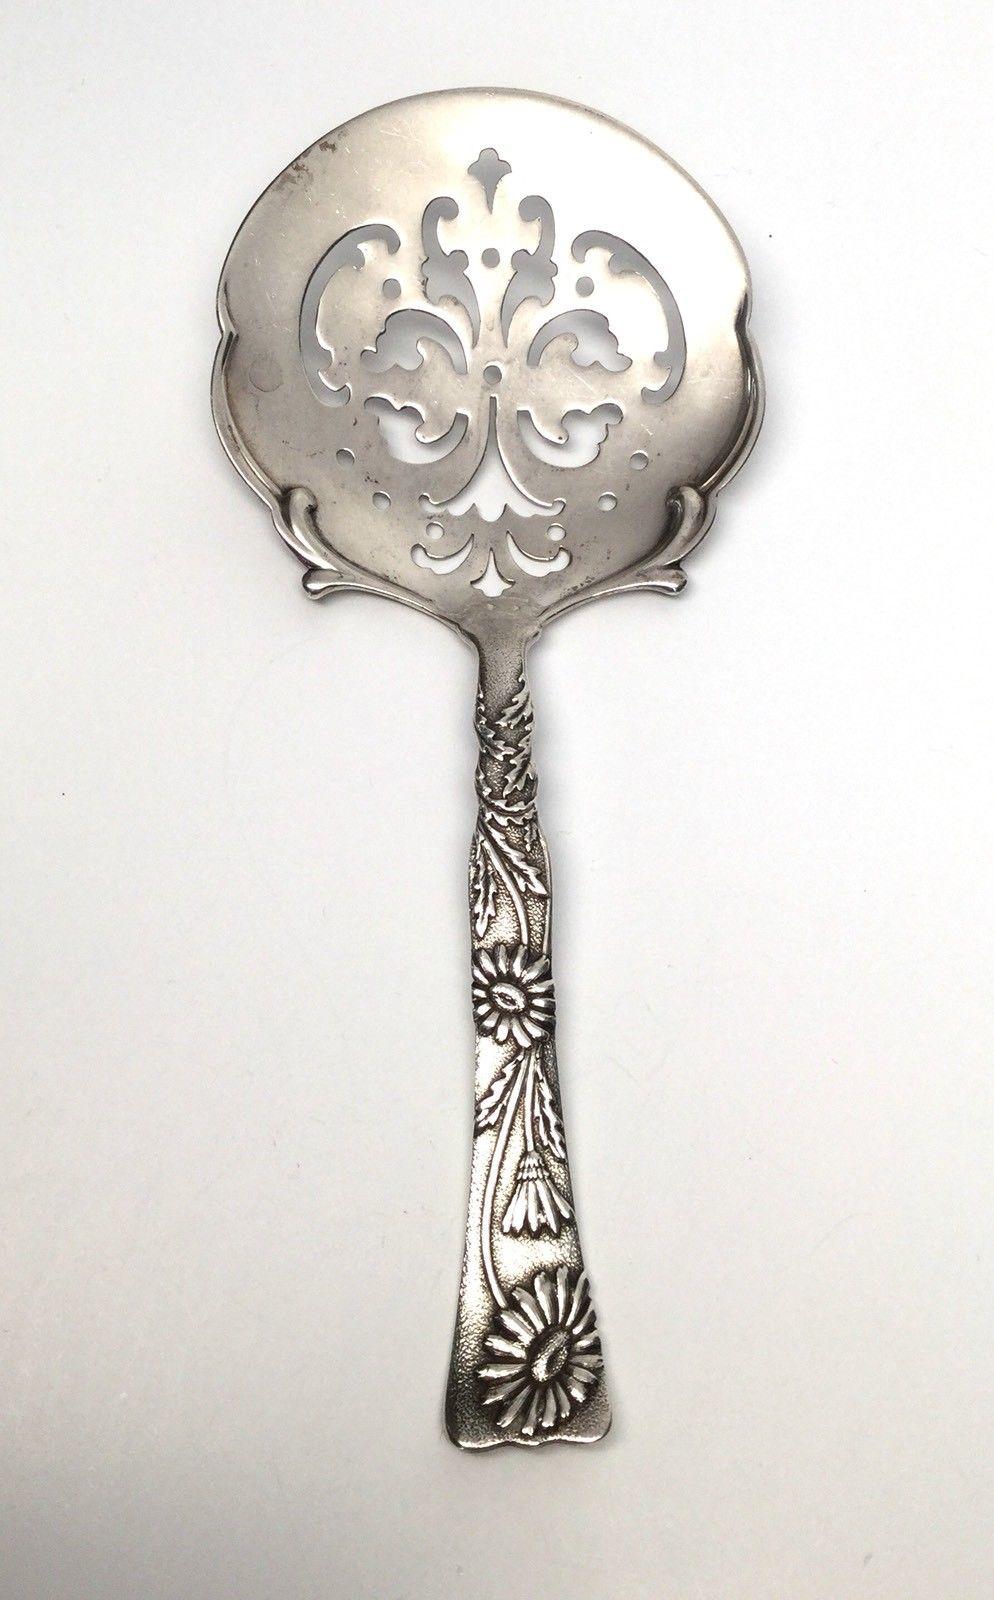 Tiffany & Co. sterling silver 1872 vine pattern tomato server with daisies

Antique Tiffany & Co. sterling silver pierced tomato server in the 1872 Vine pattern with Daisy motif. It is a beautiful piece to add to your collection!

Measurement: